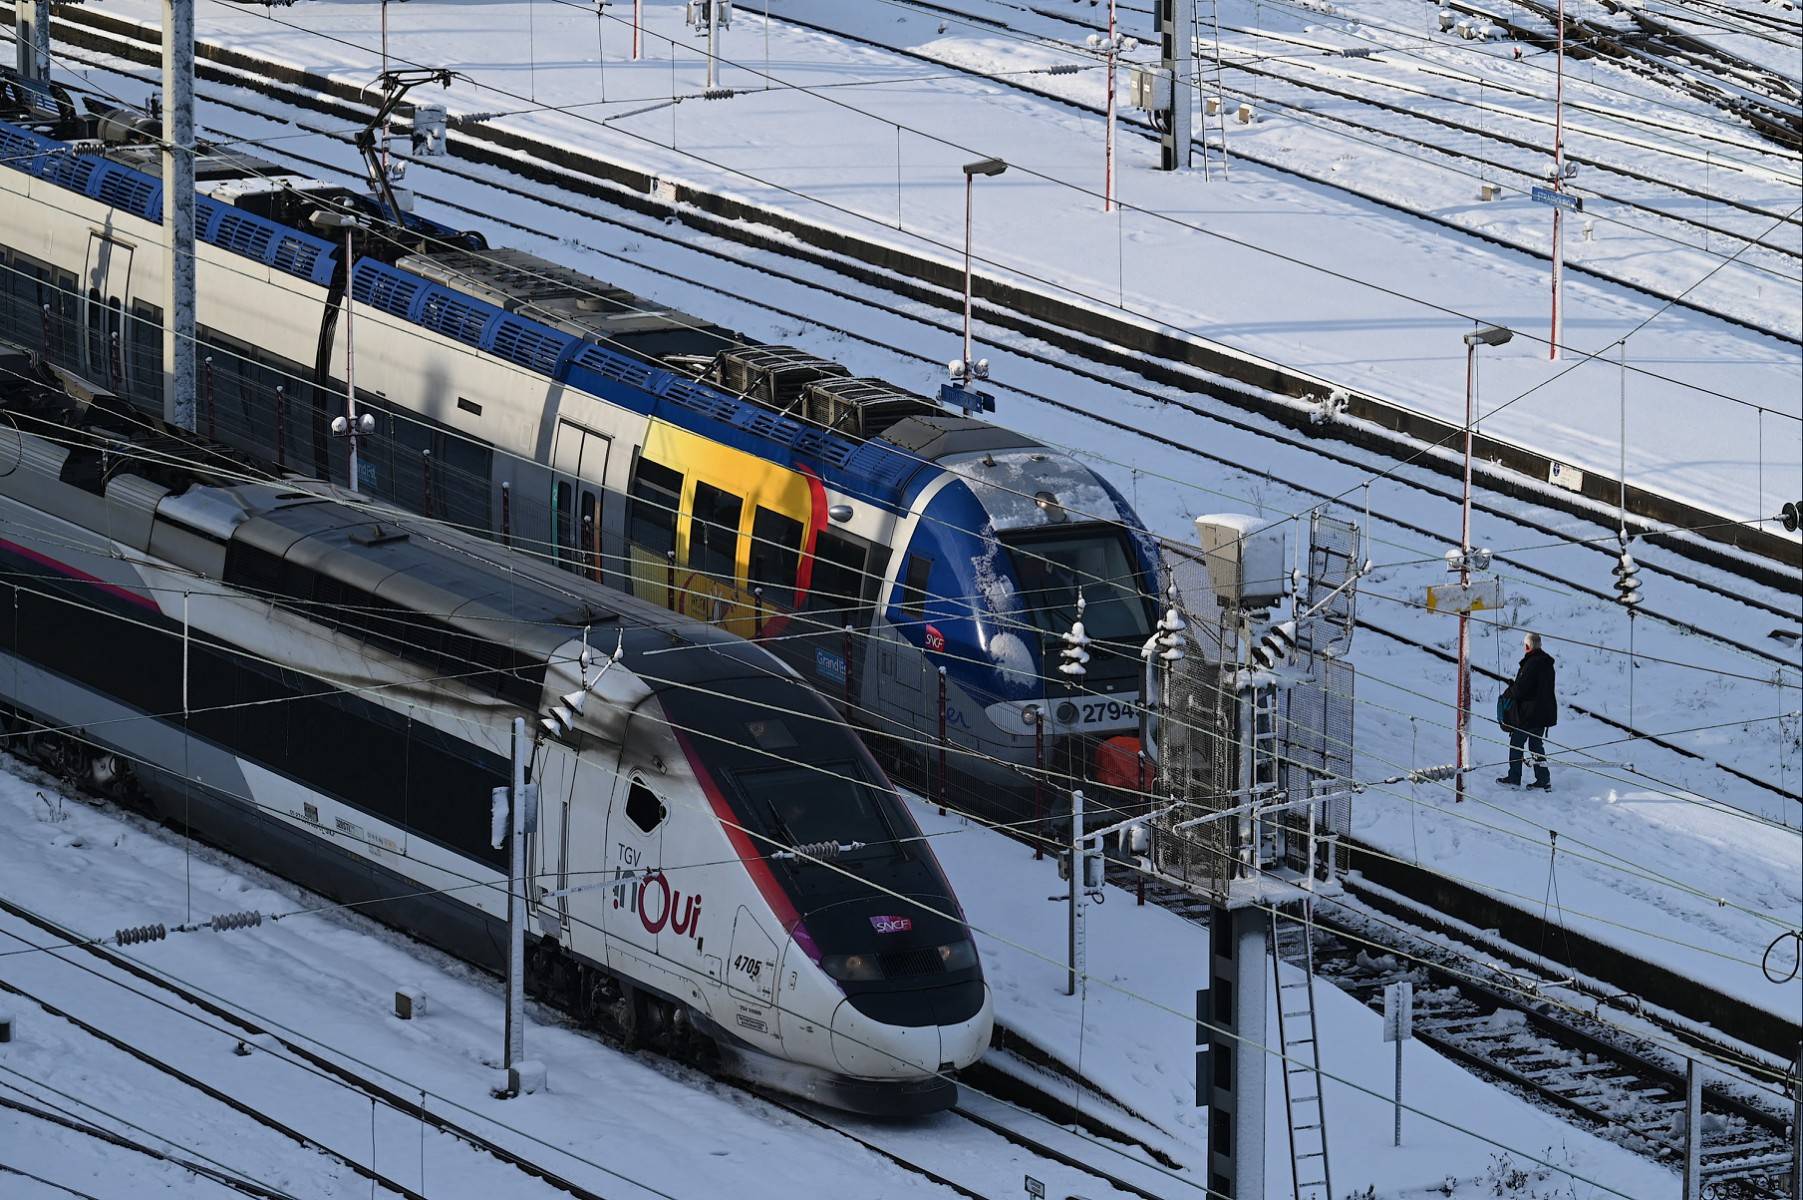 Train access to French Alps to remain disrupted through ski season